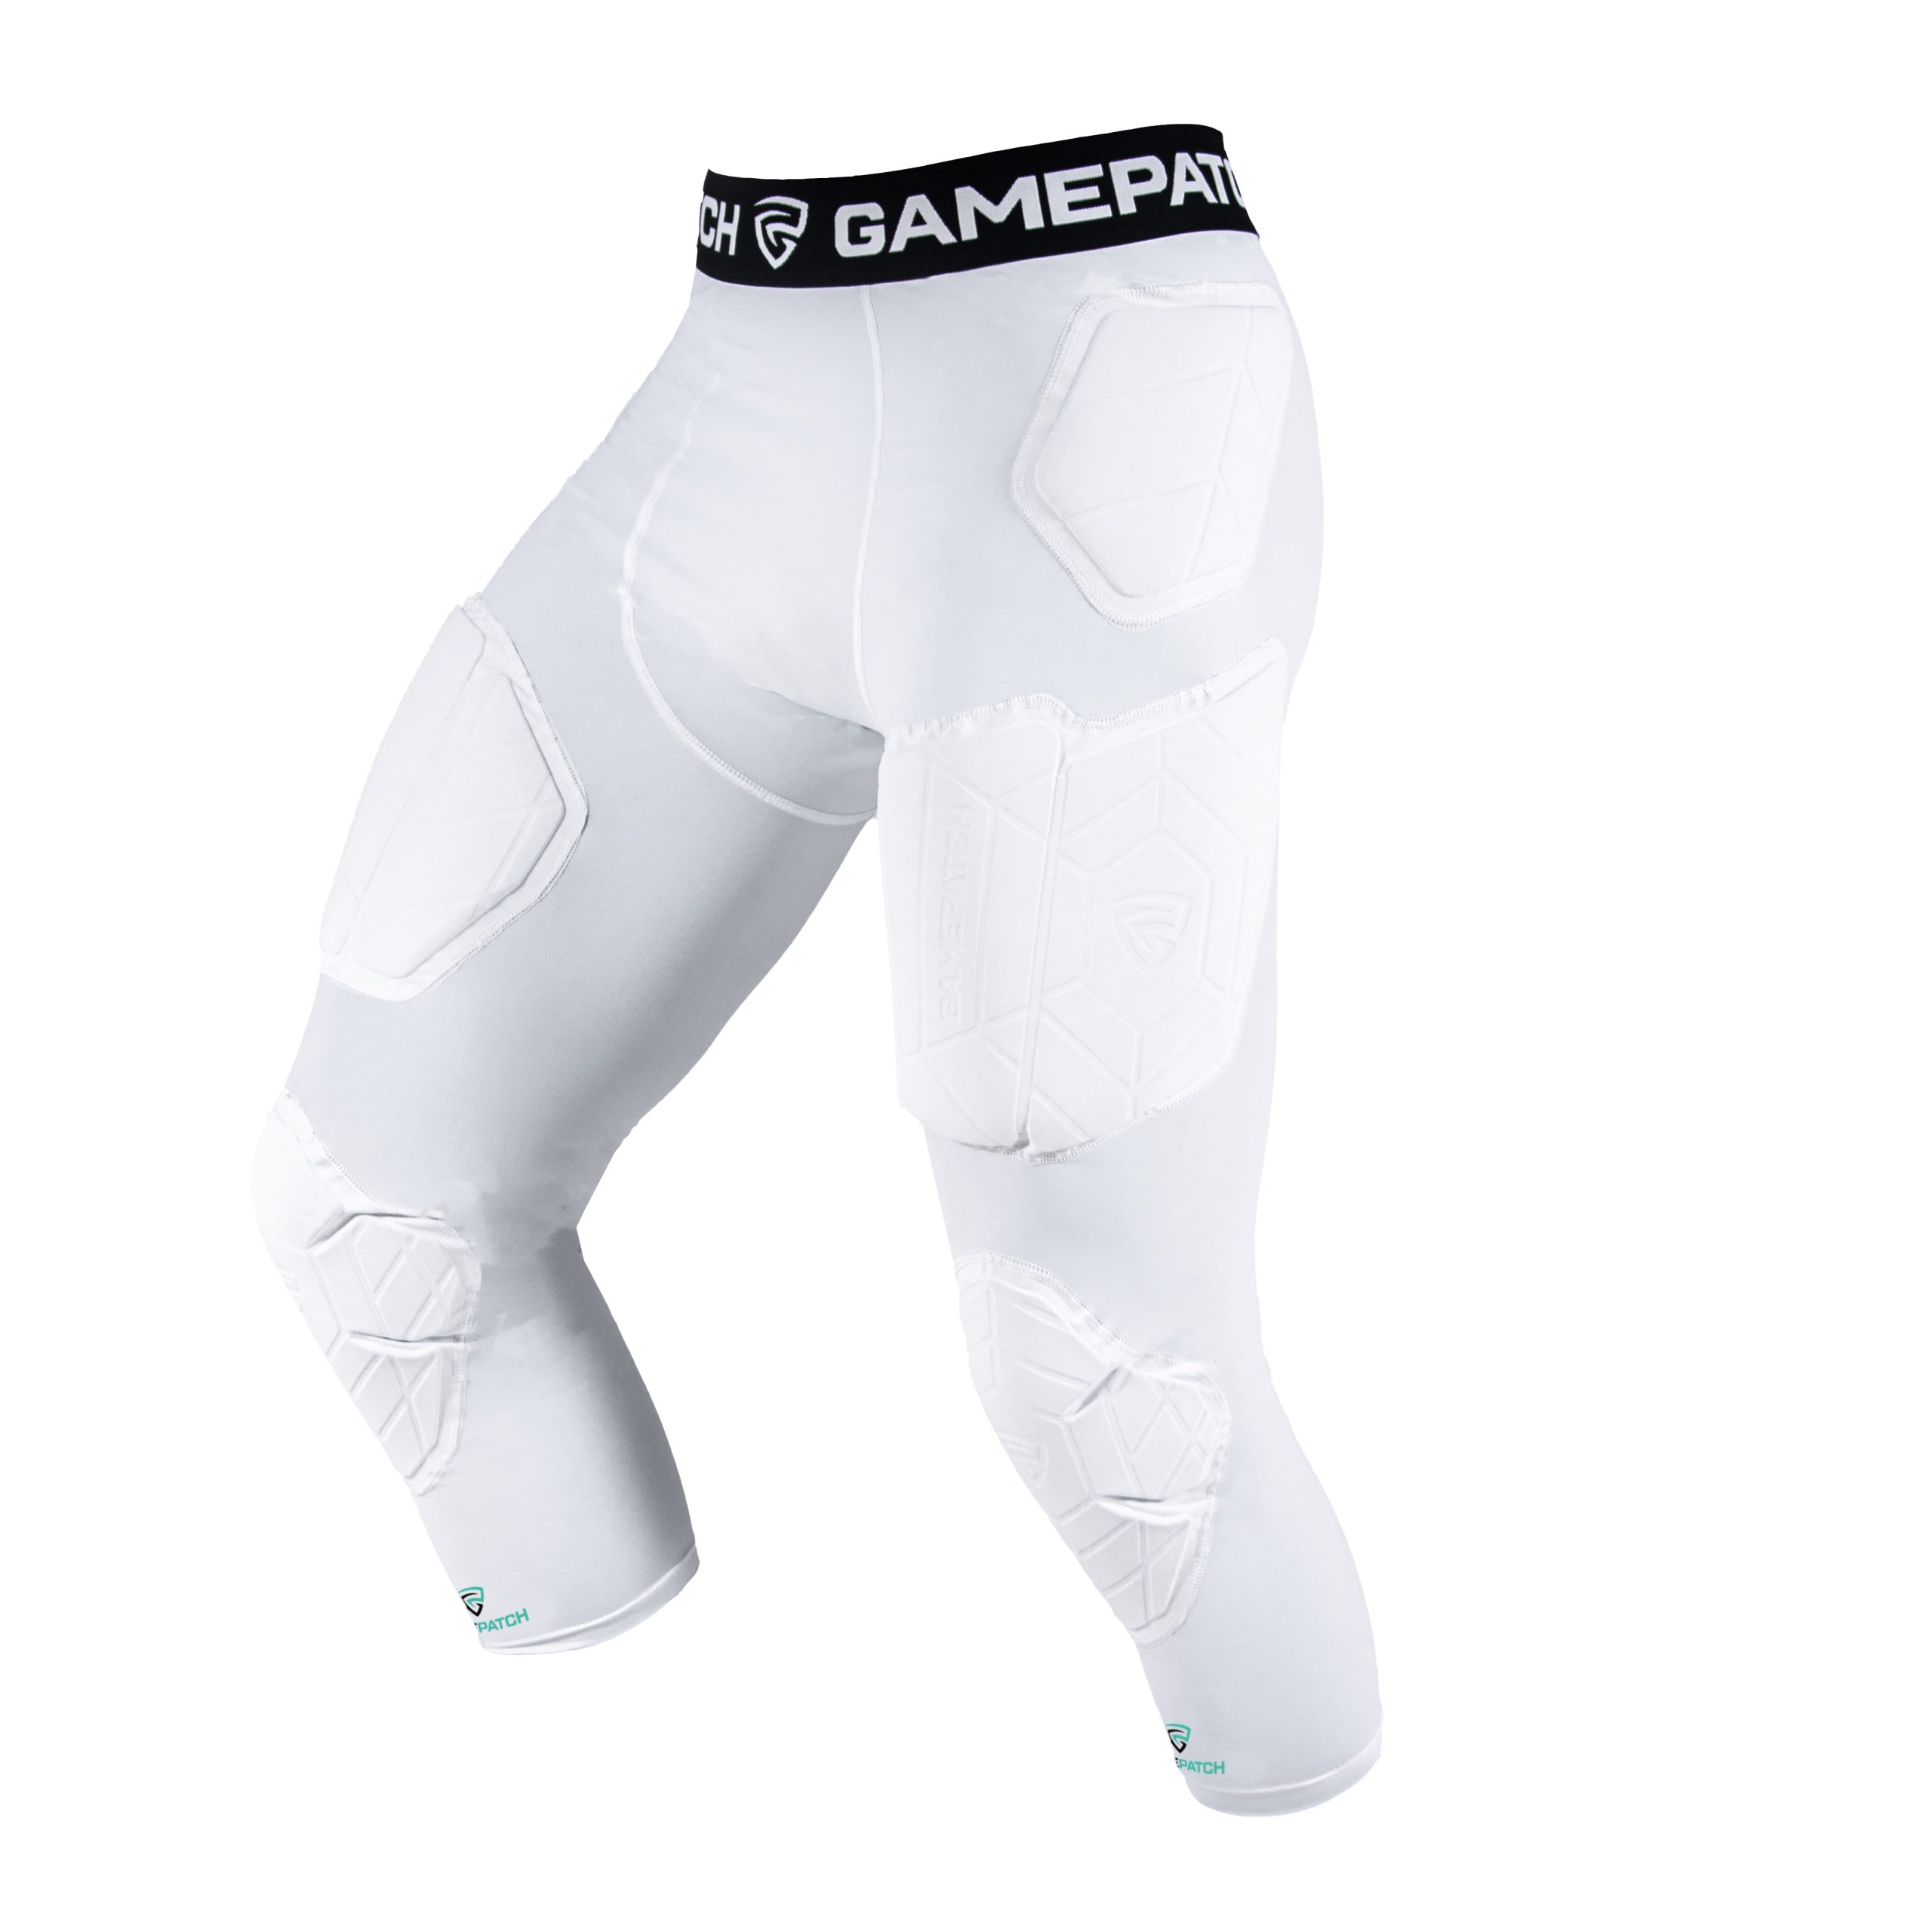 Gamepatch is Committed to Player Body Protection, Backed by Celtics Newly Acquired Kristaps Porzingis